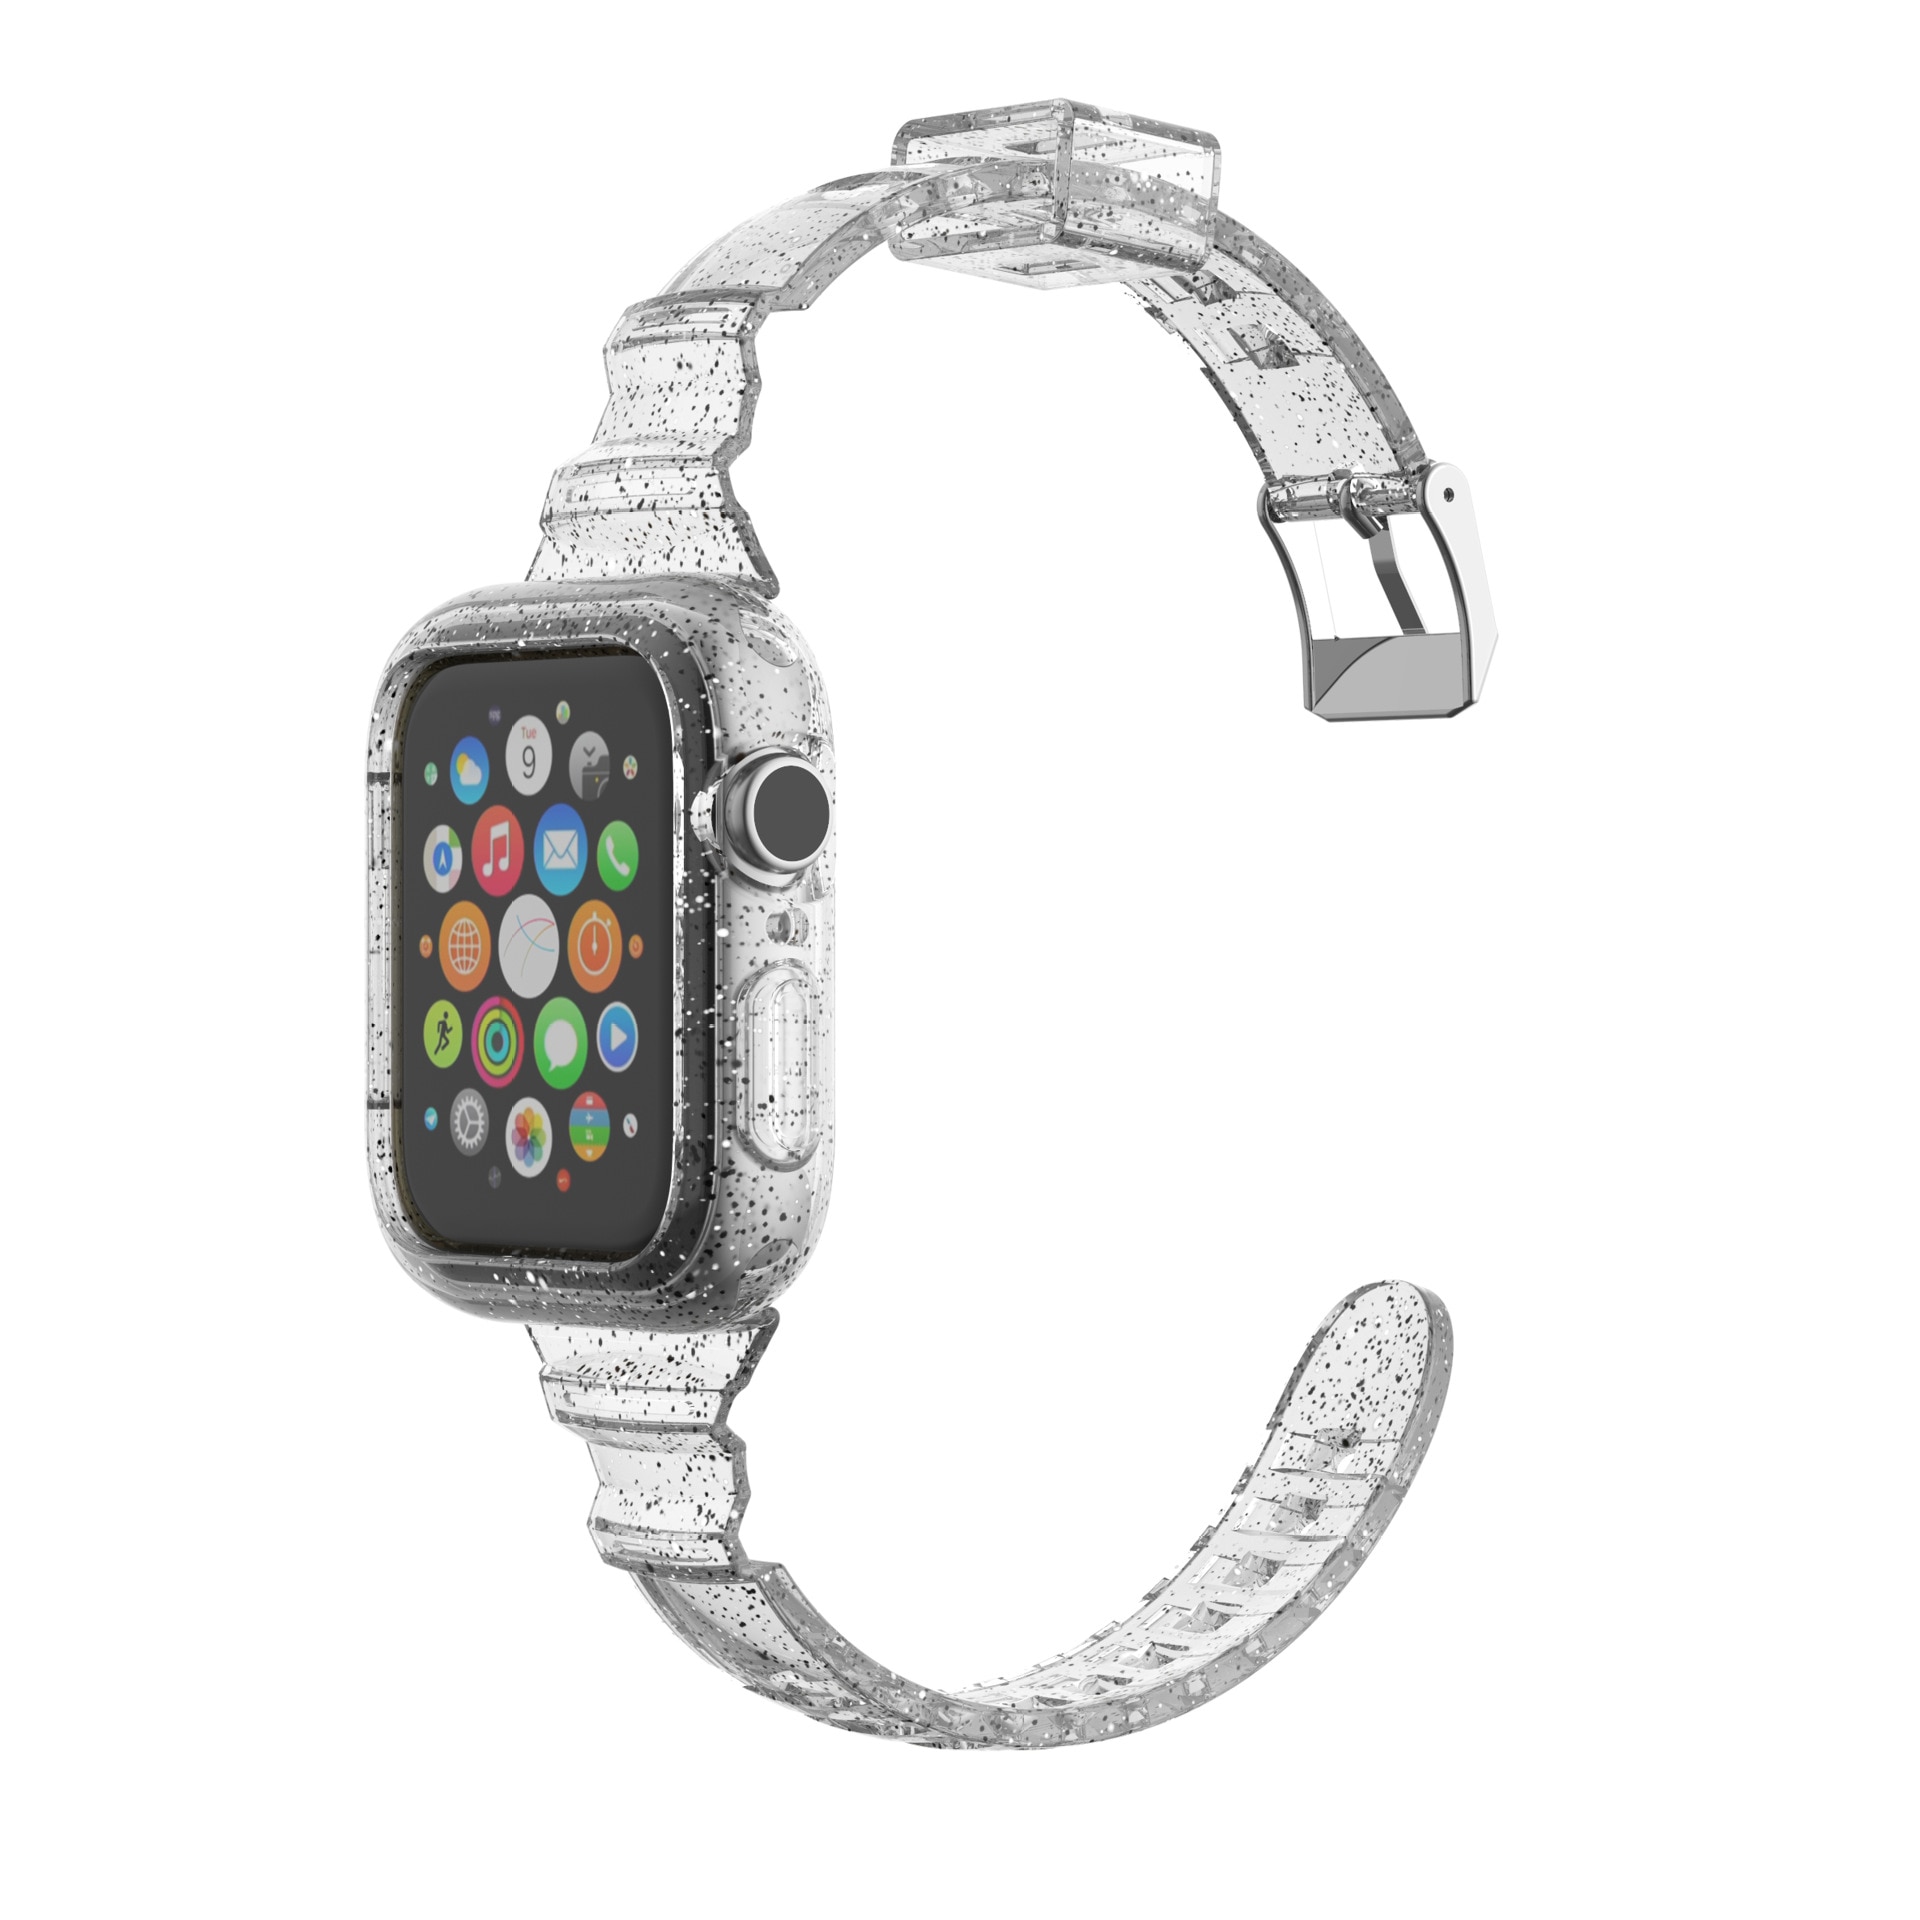 Dây Đeo Silicon Co Dãn Cho Đồng Hồ Apple 5 40mm 44mm Iwatch Series 4 / 5 / 6 / Se